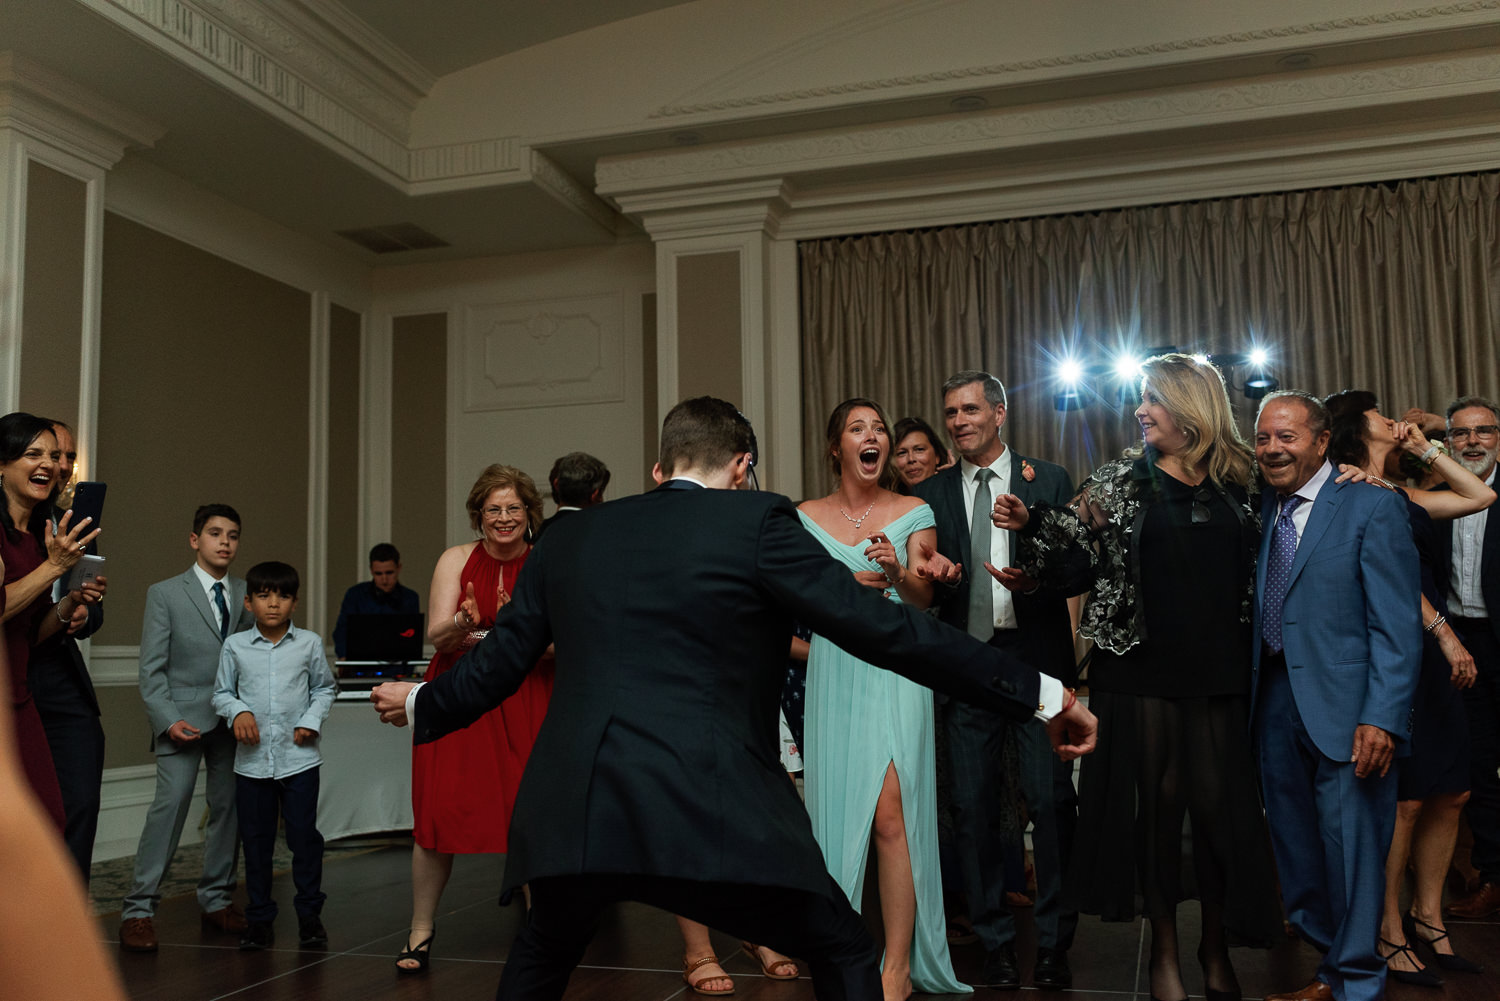 guests dancing at lord nelson hotel wedding reception